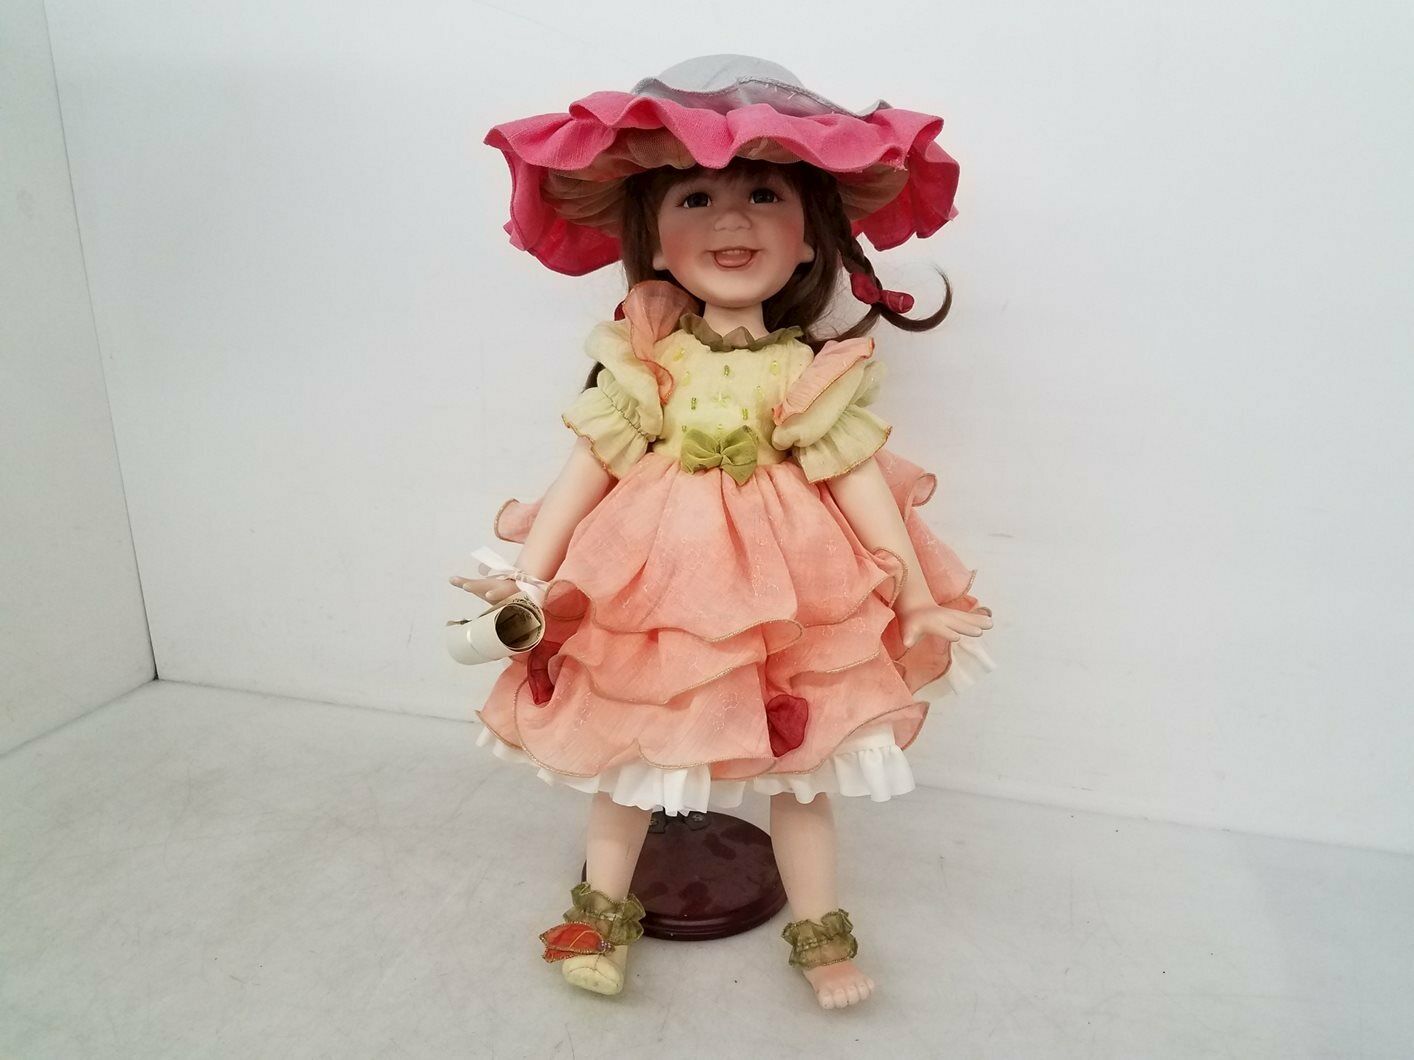 Show Stoppers "libby" 22in Porcelain Doll Limited Edition 150/5000 W/coa